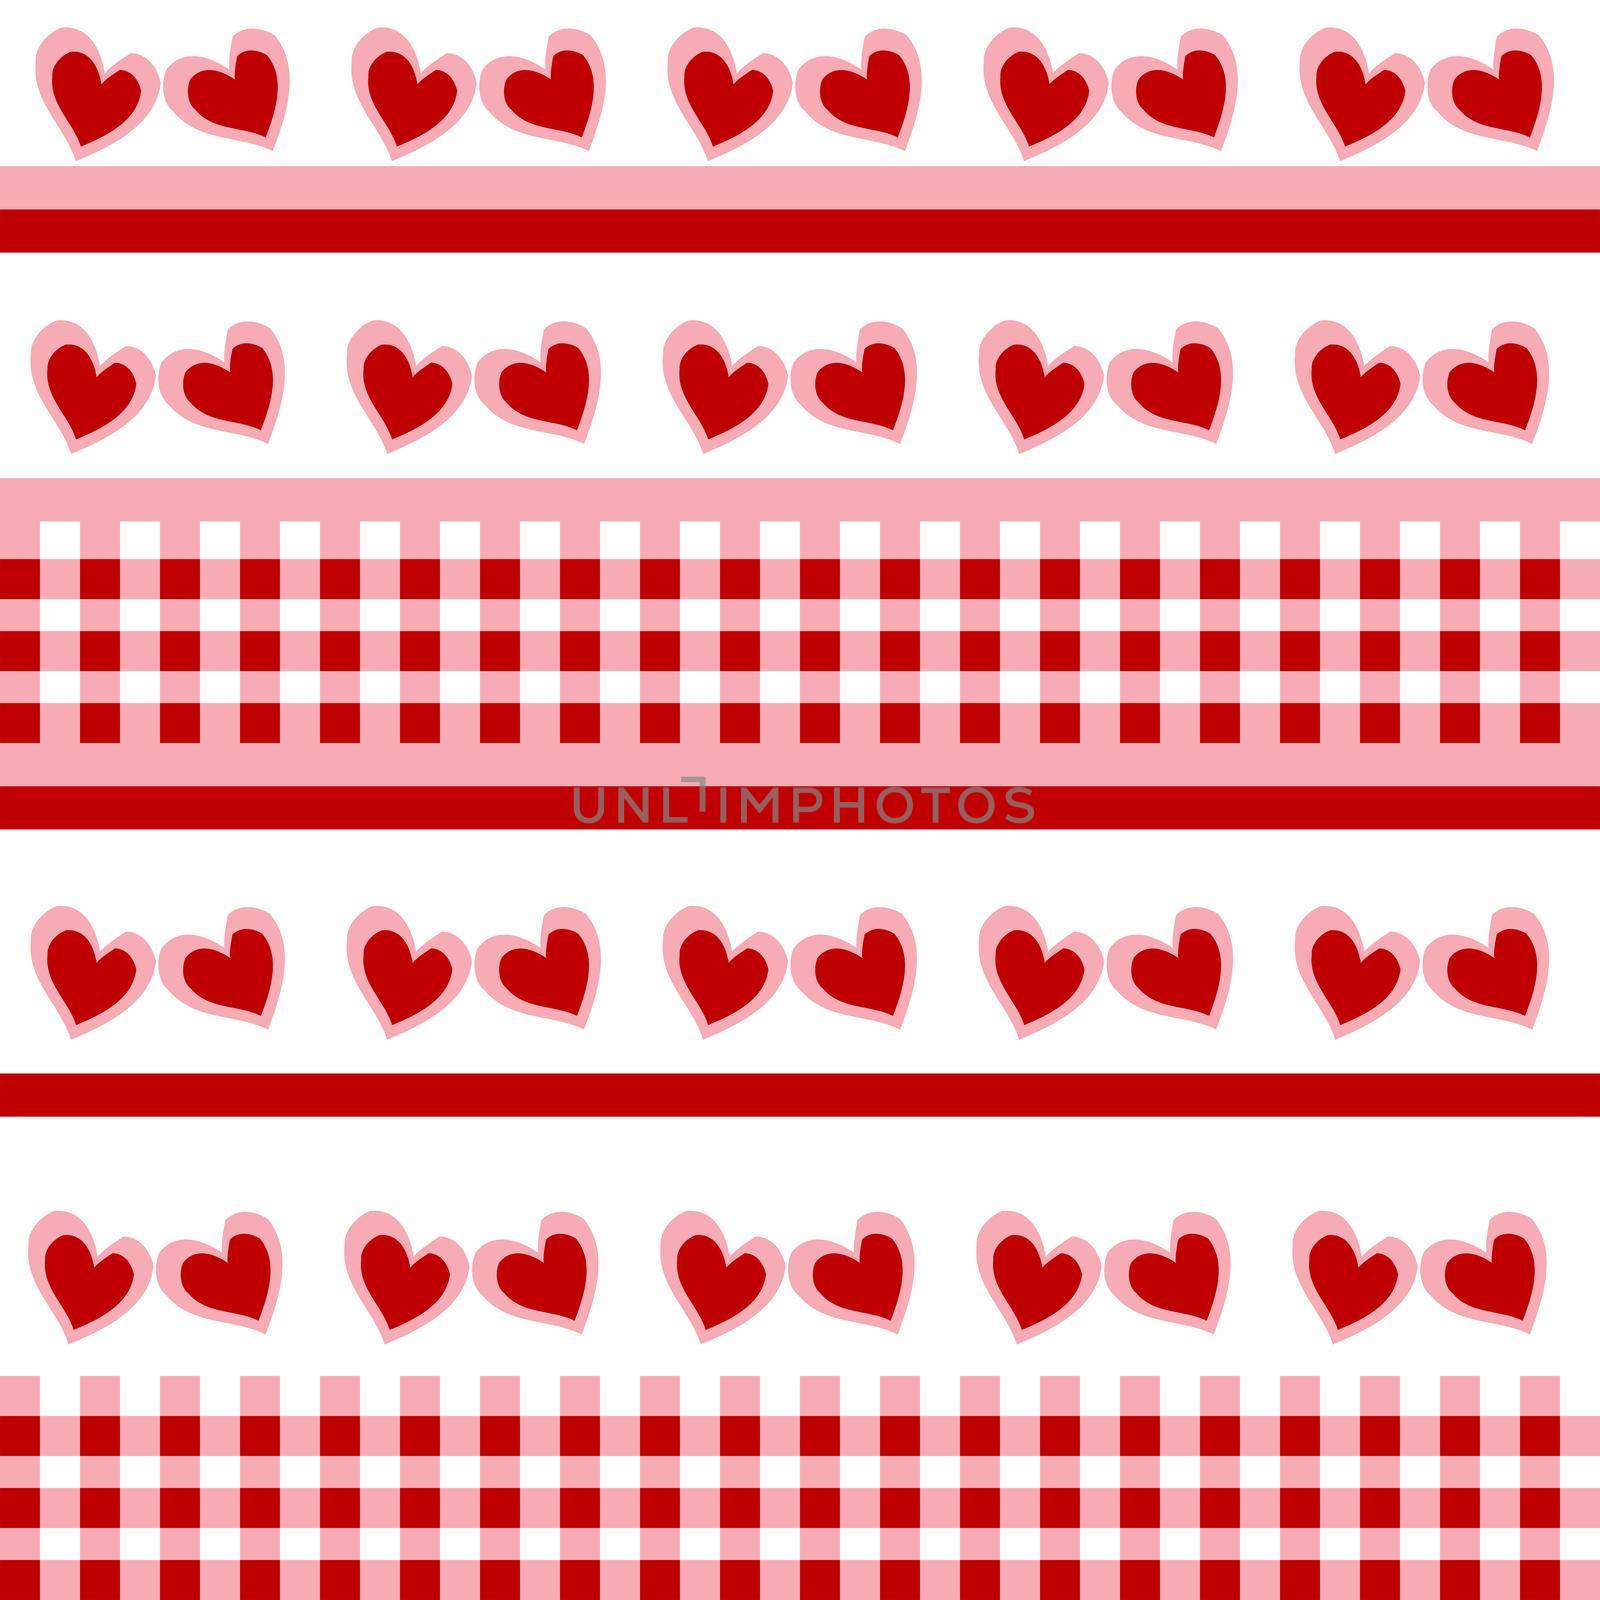 Seamless pattern with red doodle hearts